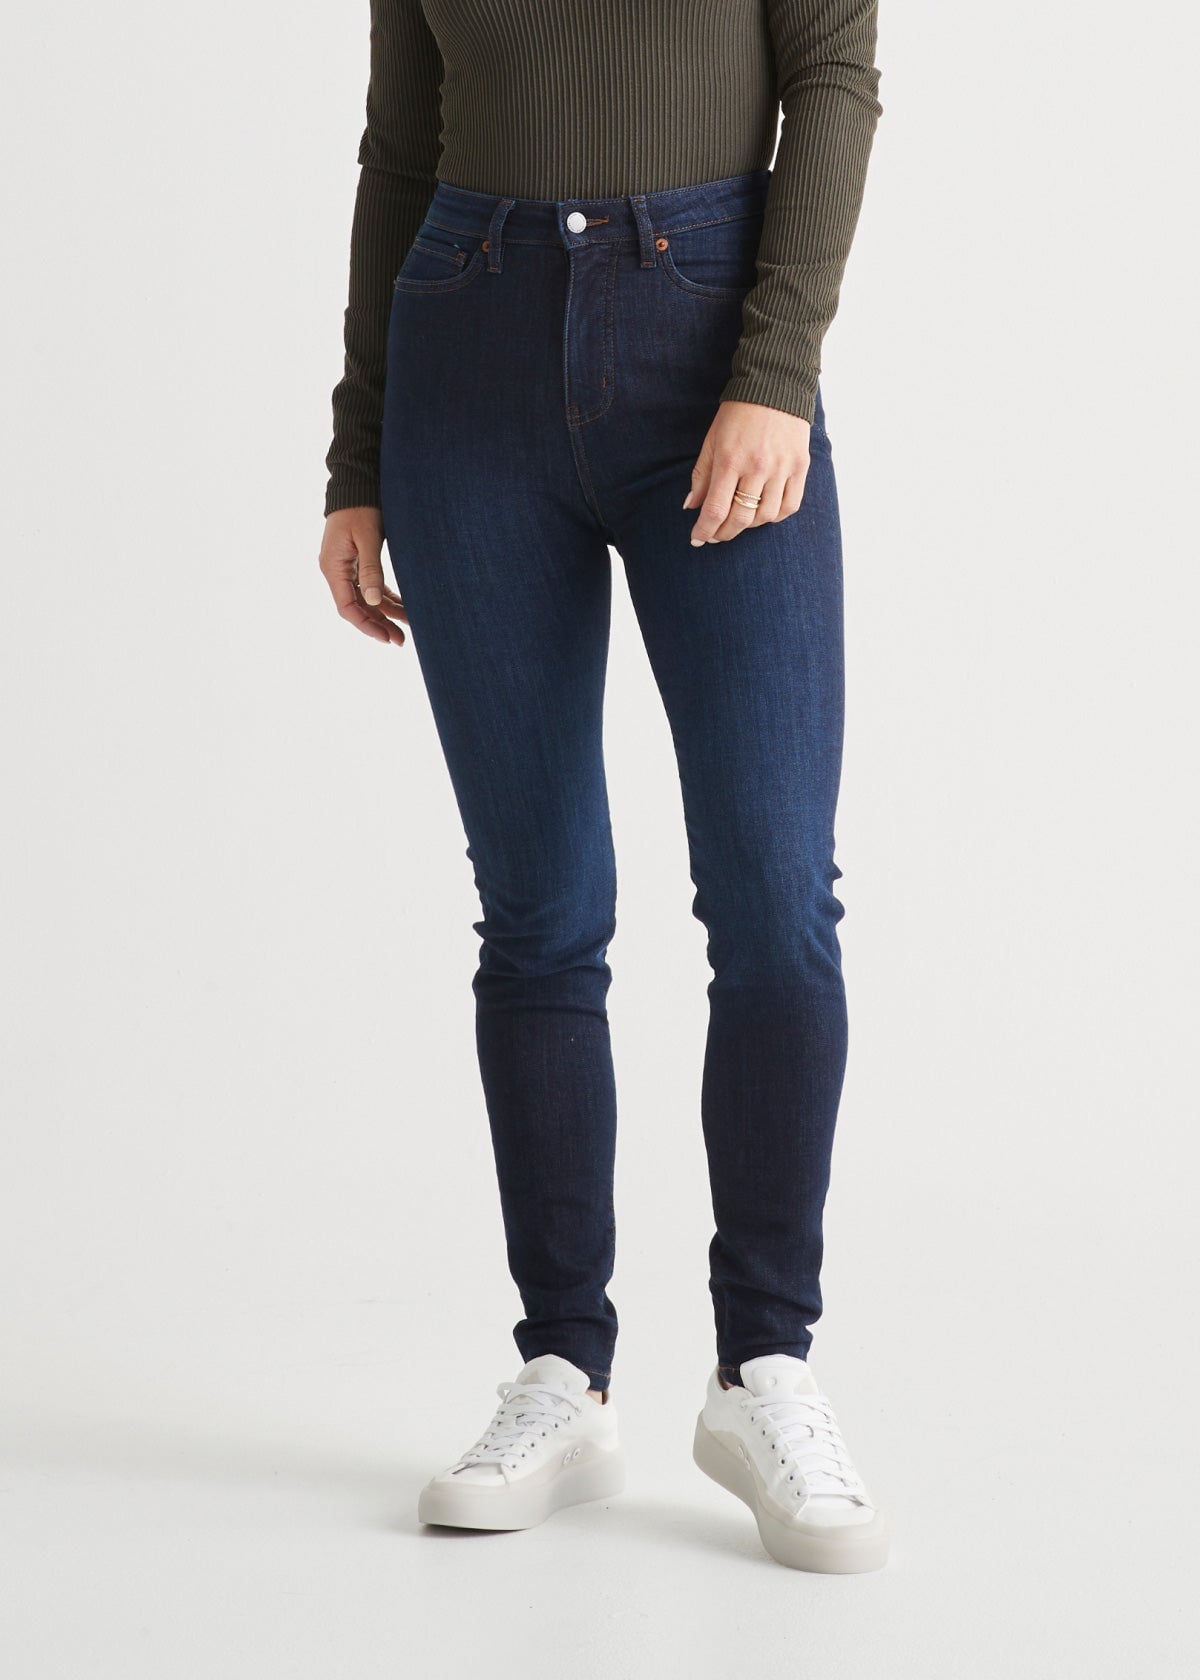 24 Dark Wash Jeans to Elevate Any Look